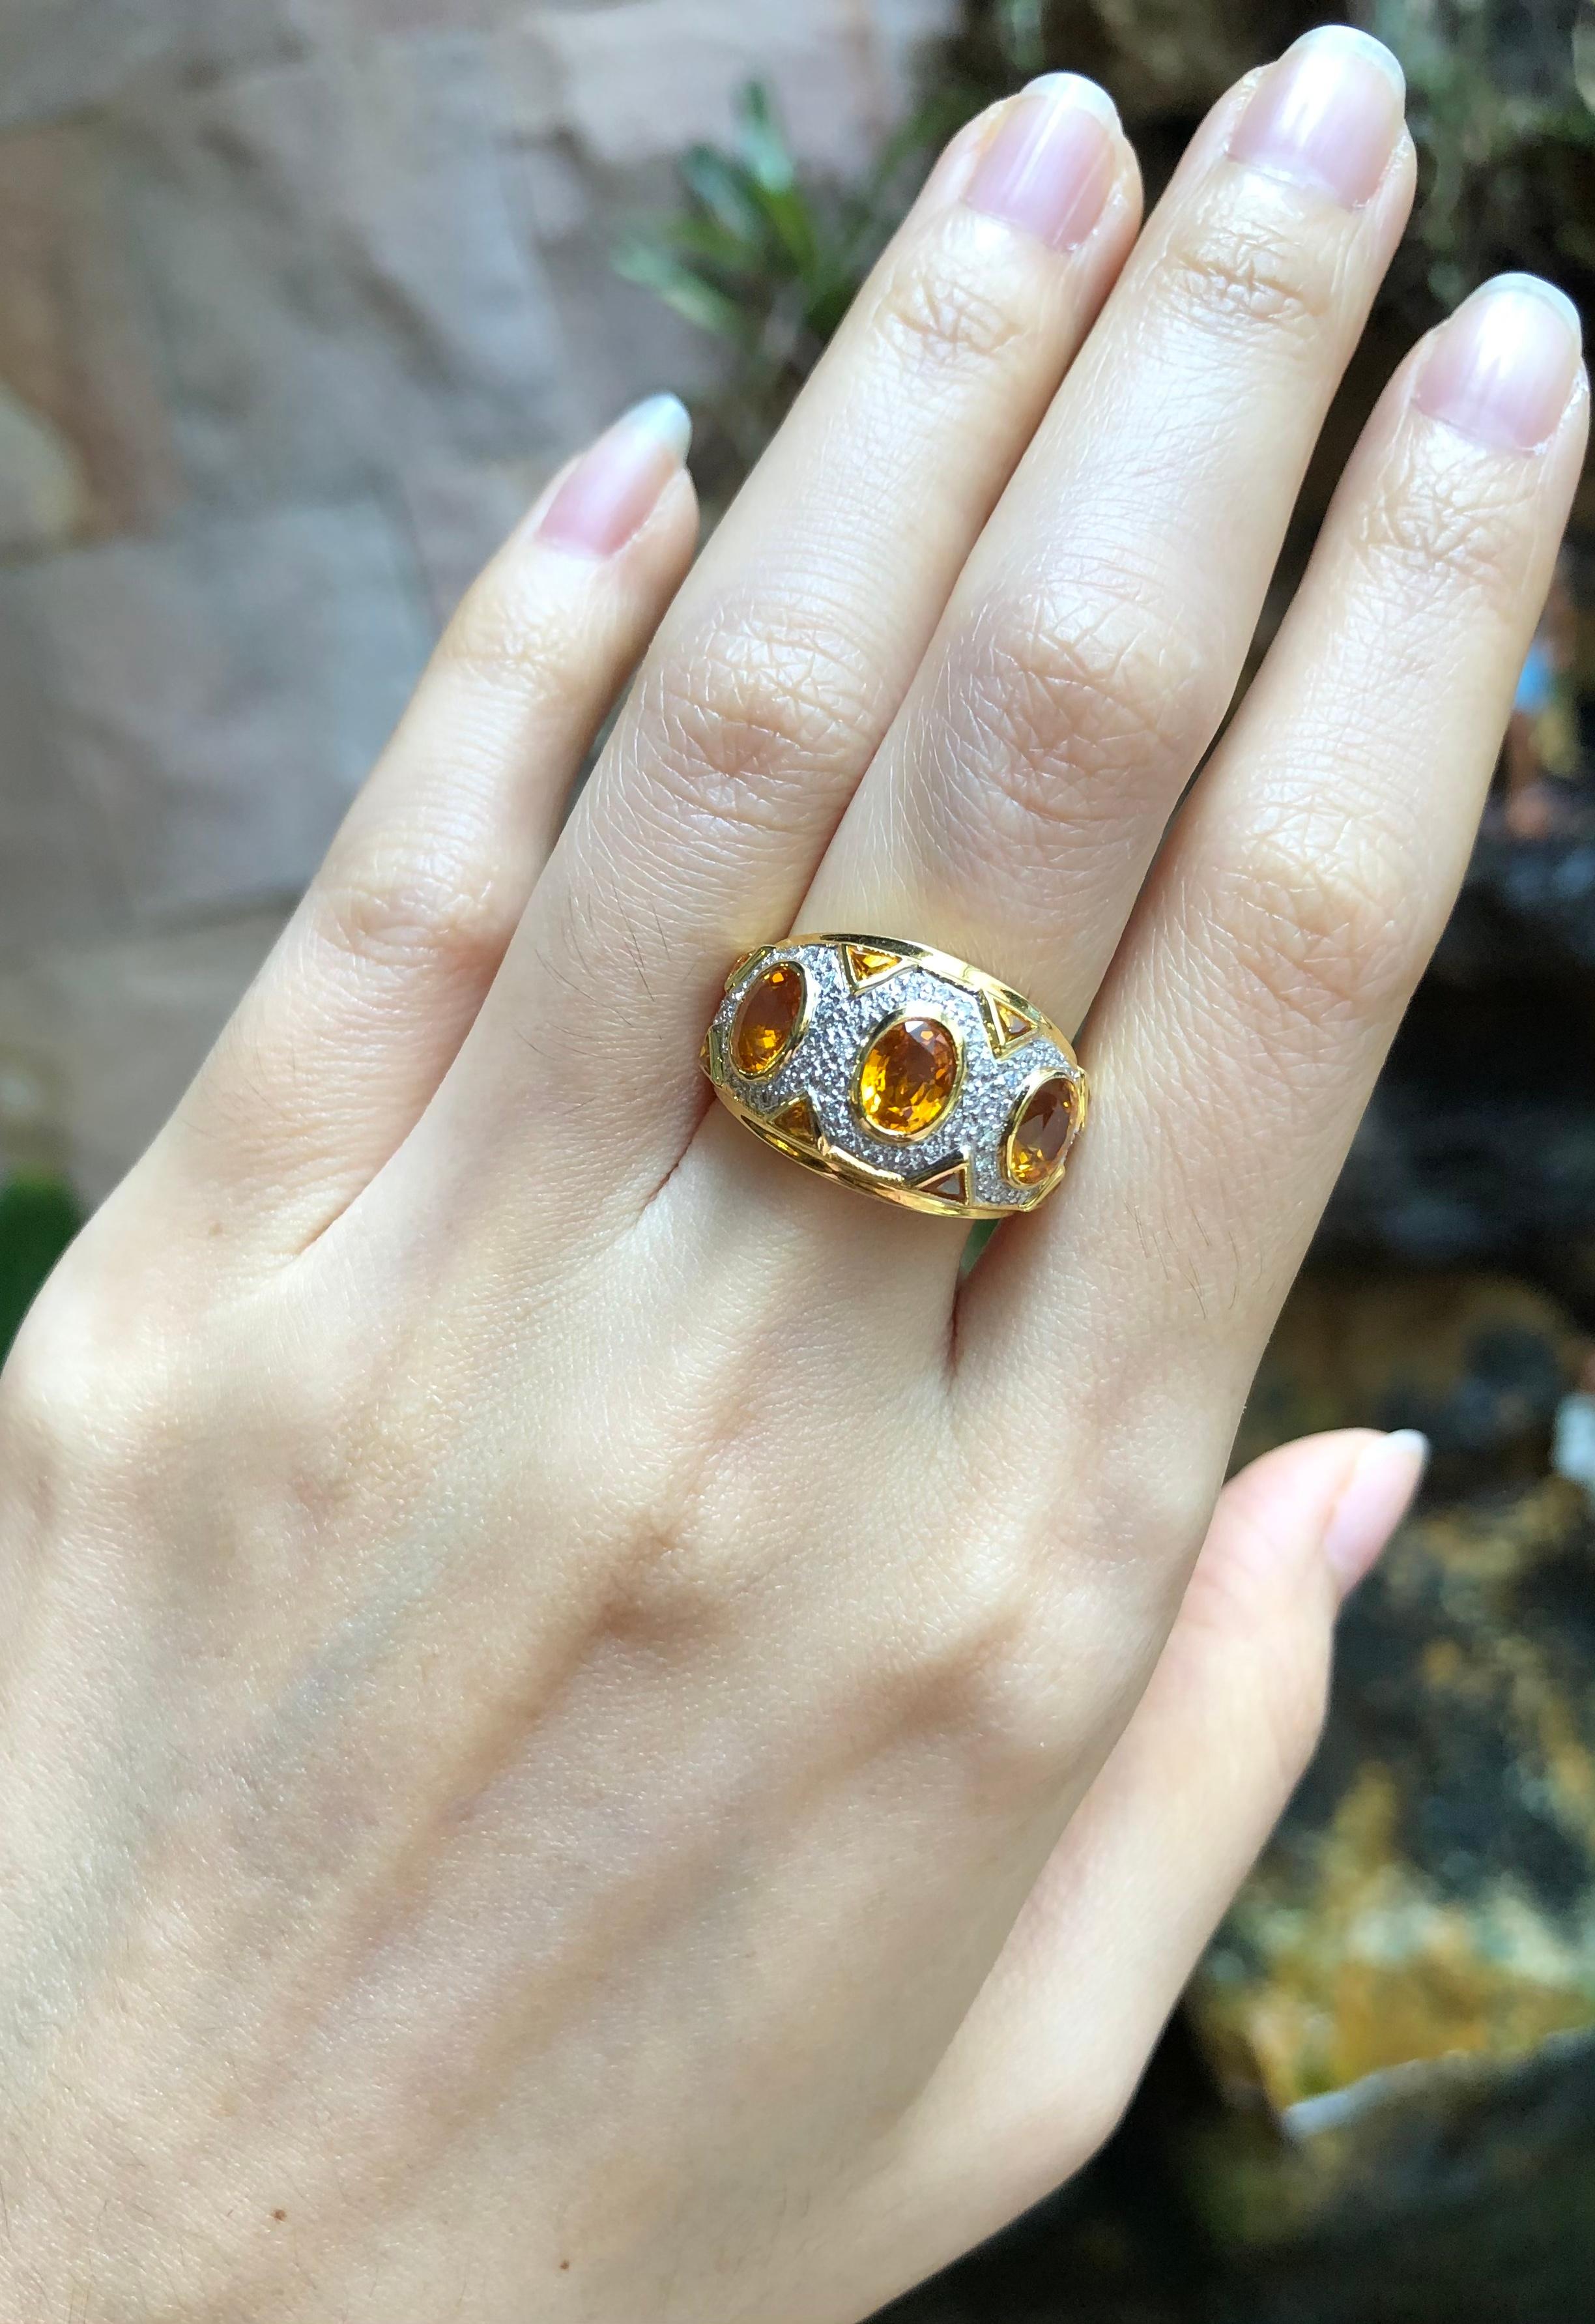 Yellow Sapphire 3.63 carats with Diamond 0.25 carat Ring set in 18 Karat Gold Settings

Width:  2.1 cm 
Length: 1.4 cm
Ring Size: 53
Total Weight: 9.53 grams

